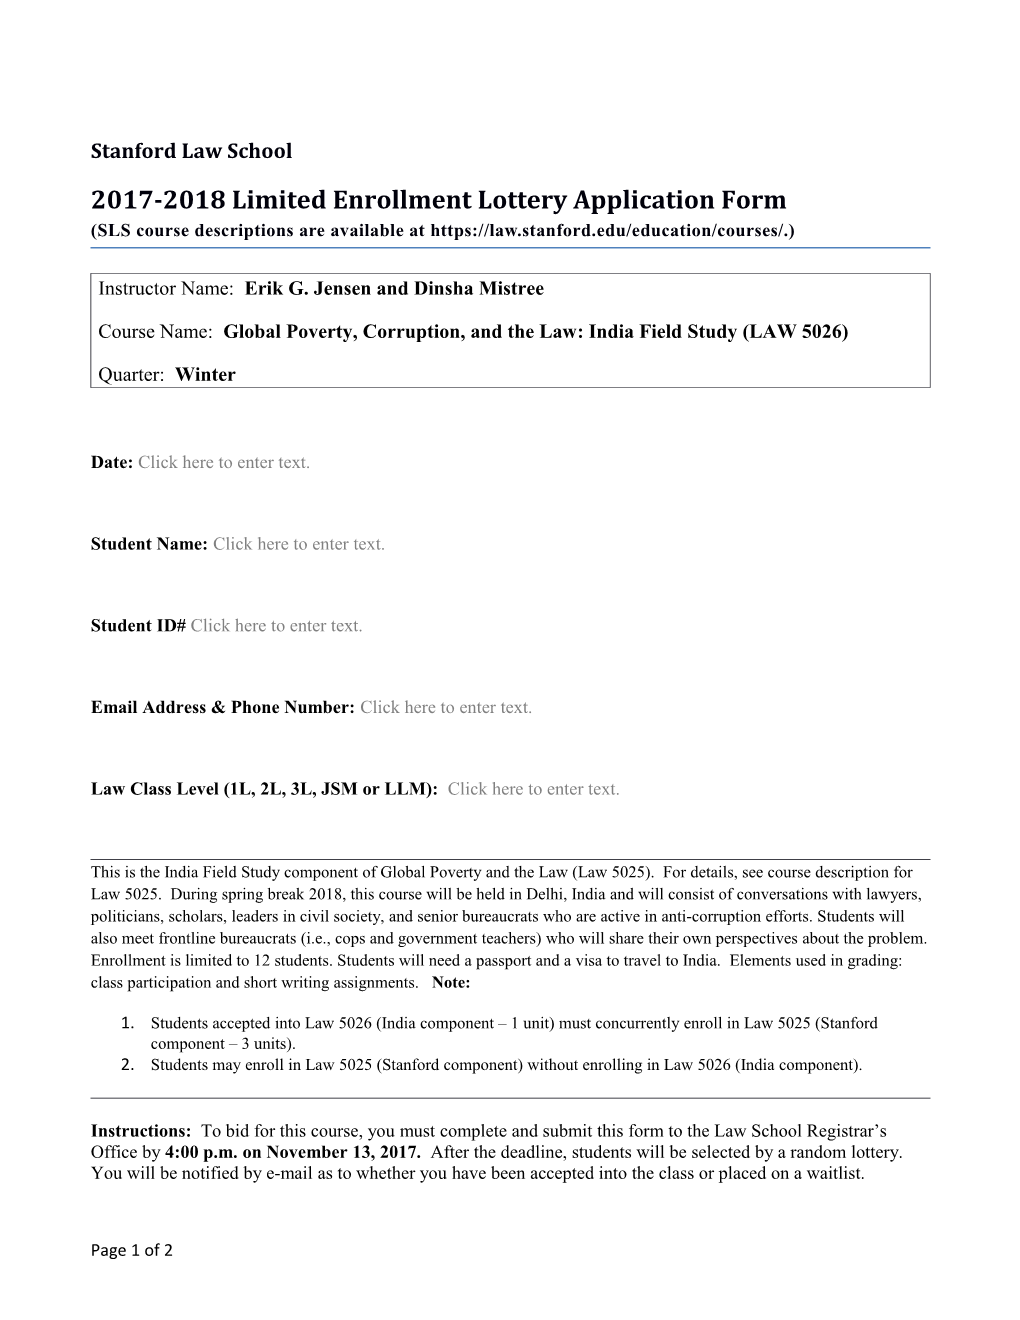 2017-2018 Limited Enrollment Lottery Application Form